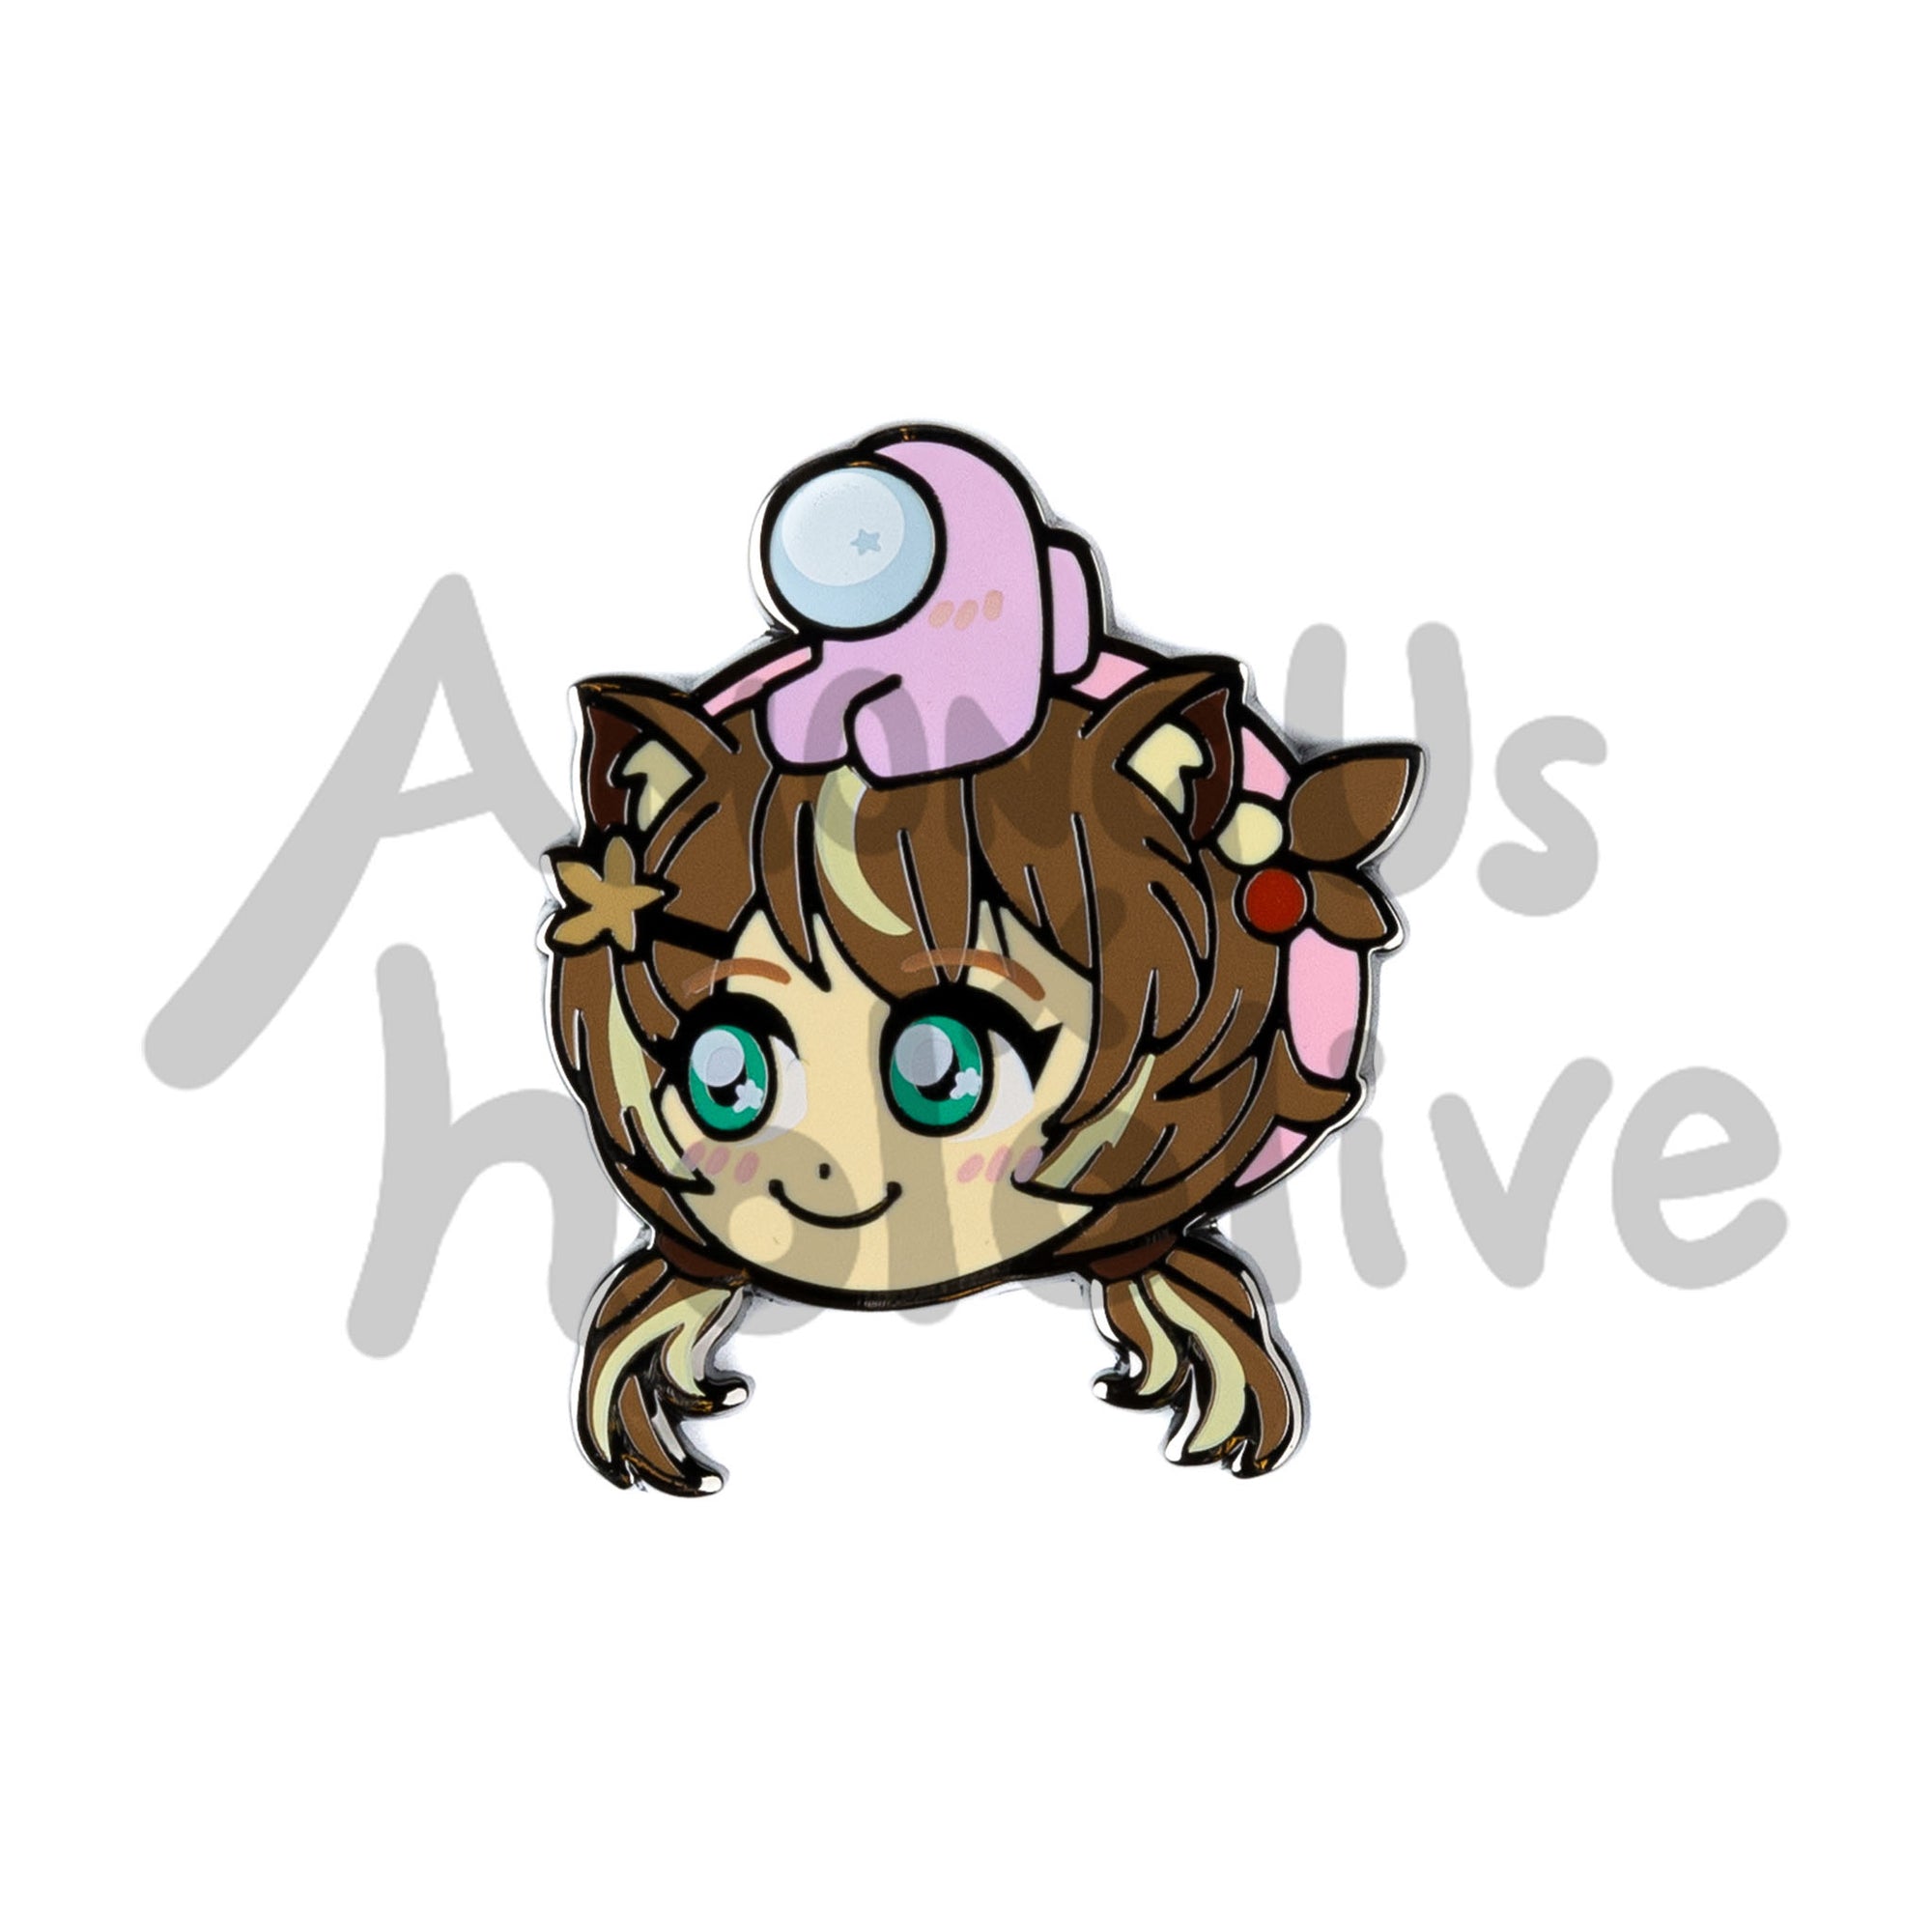 Enamel Pin of Ayunda Risu's Face from Hololive. Risu has fair skin, light green sparkly eyes, squirrel ears, and light brown and blonde highlight hair. It's styled into 2 low pigtails and one ponytail. Her hair accessories are a pink beret, gumball hair tie, and a leaf barette. There's a small pink Crewmate sitting atop her head. Both characters have pink blush marks on their face. 